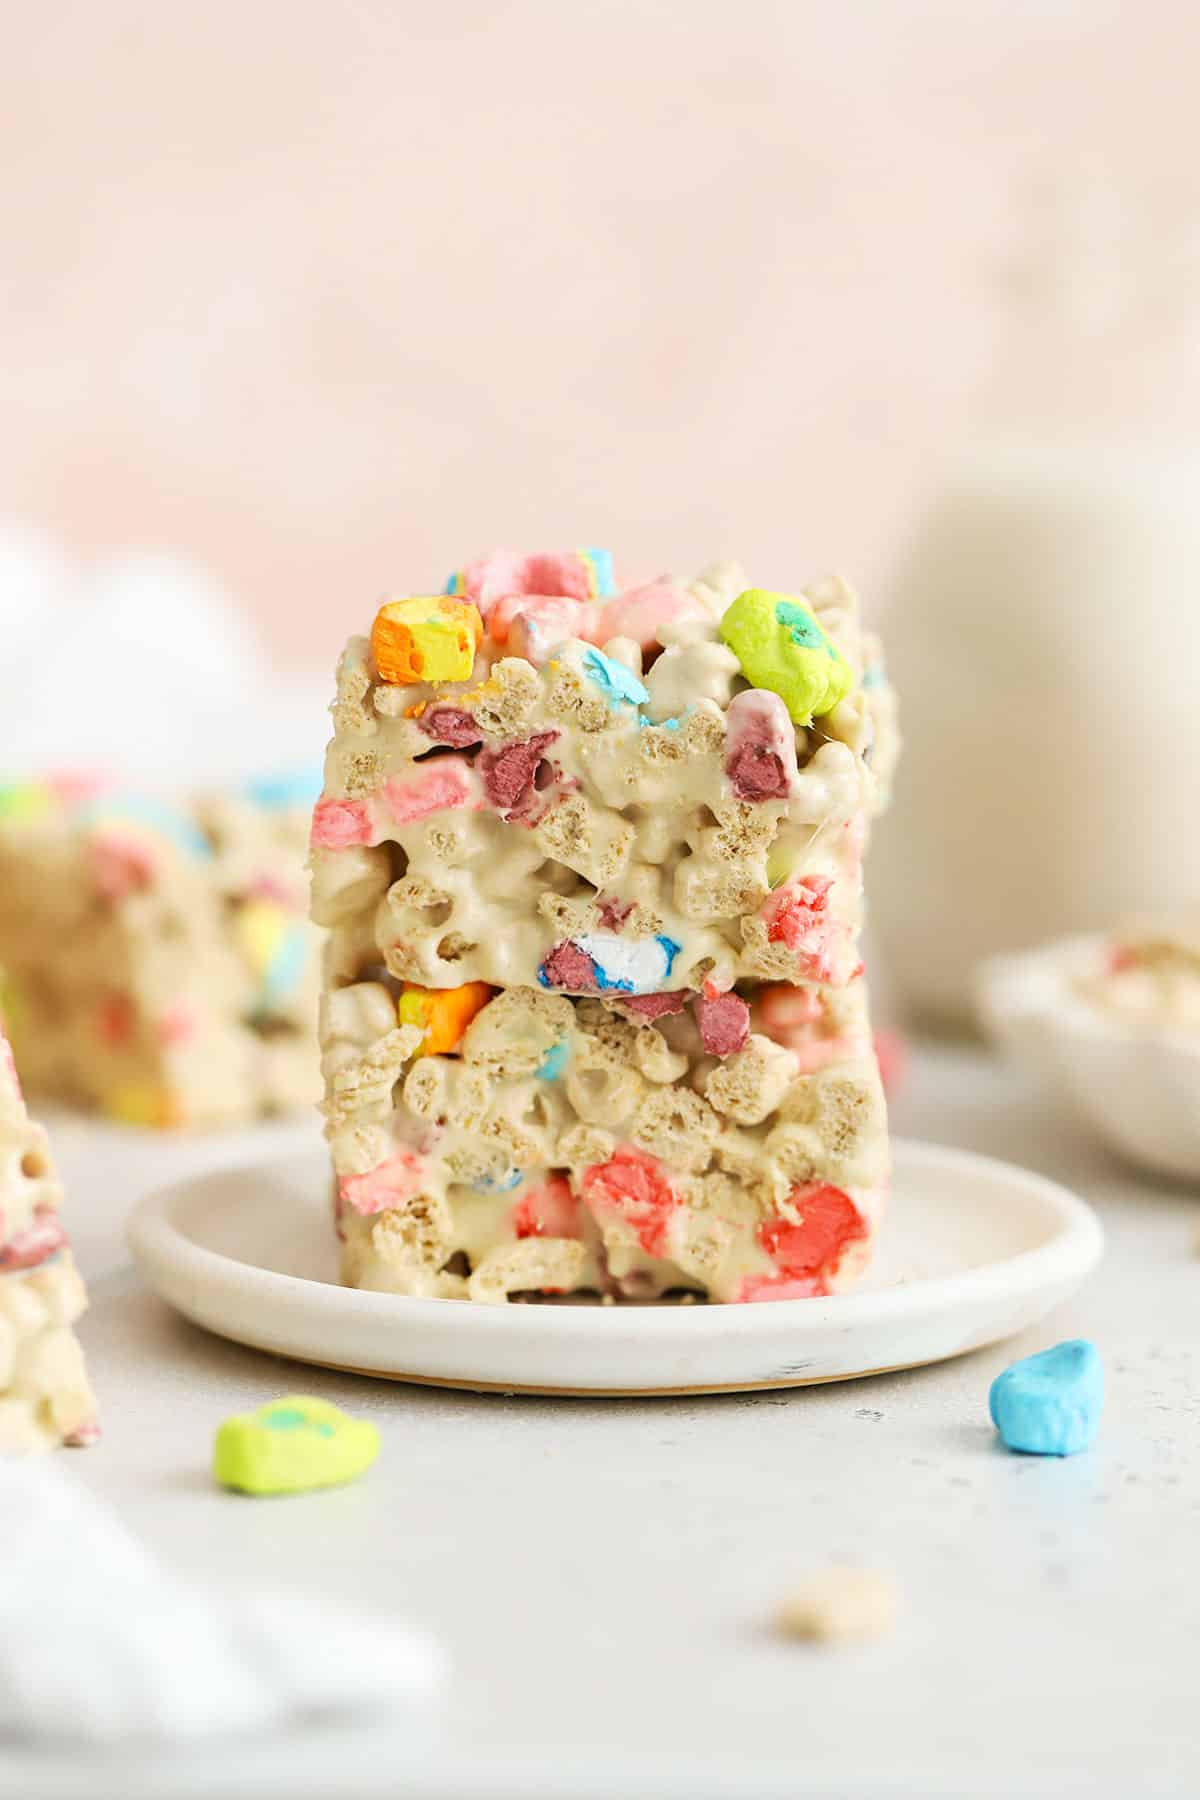 Lucky charms treats stacked on a white plate